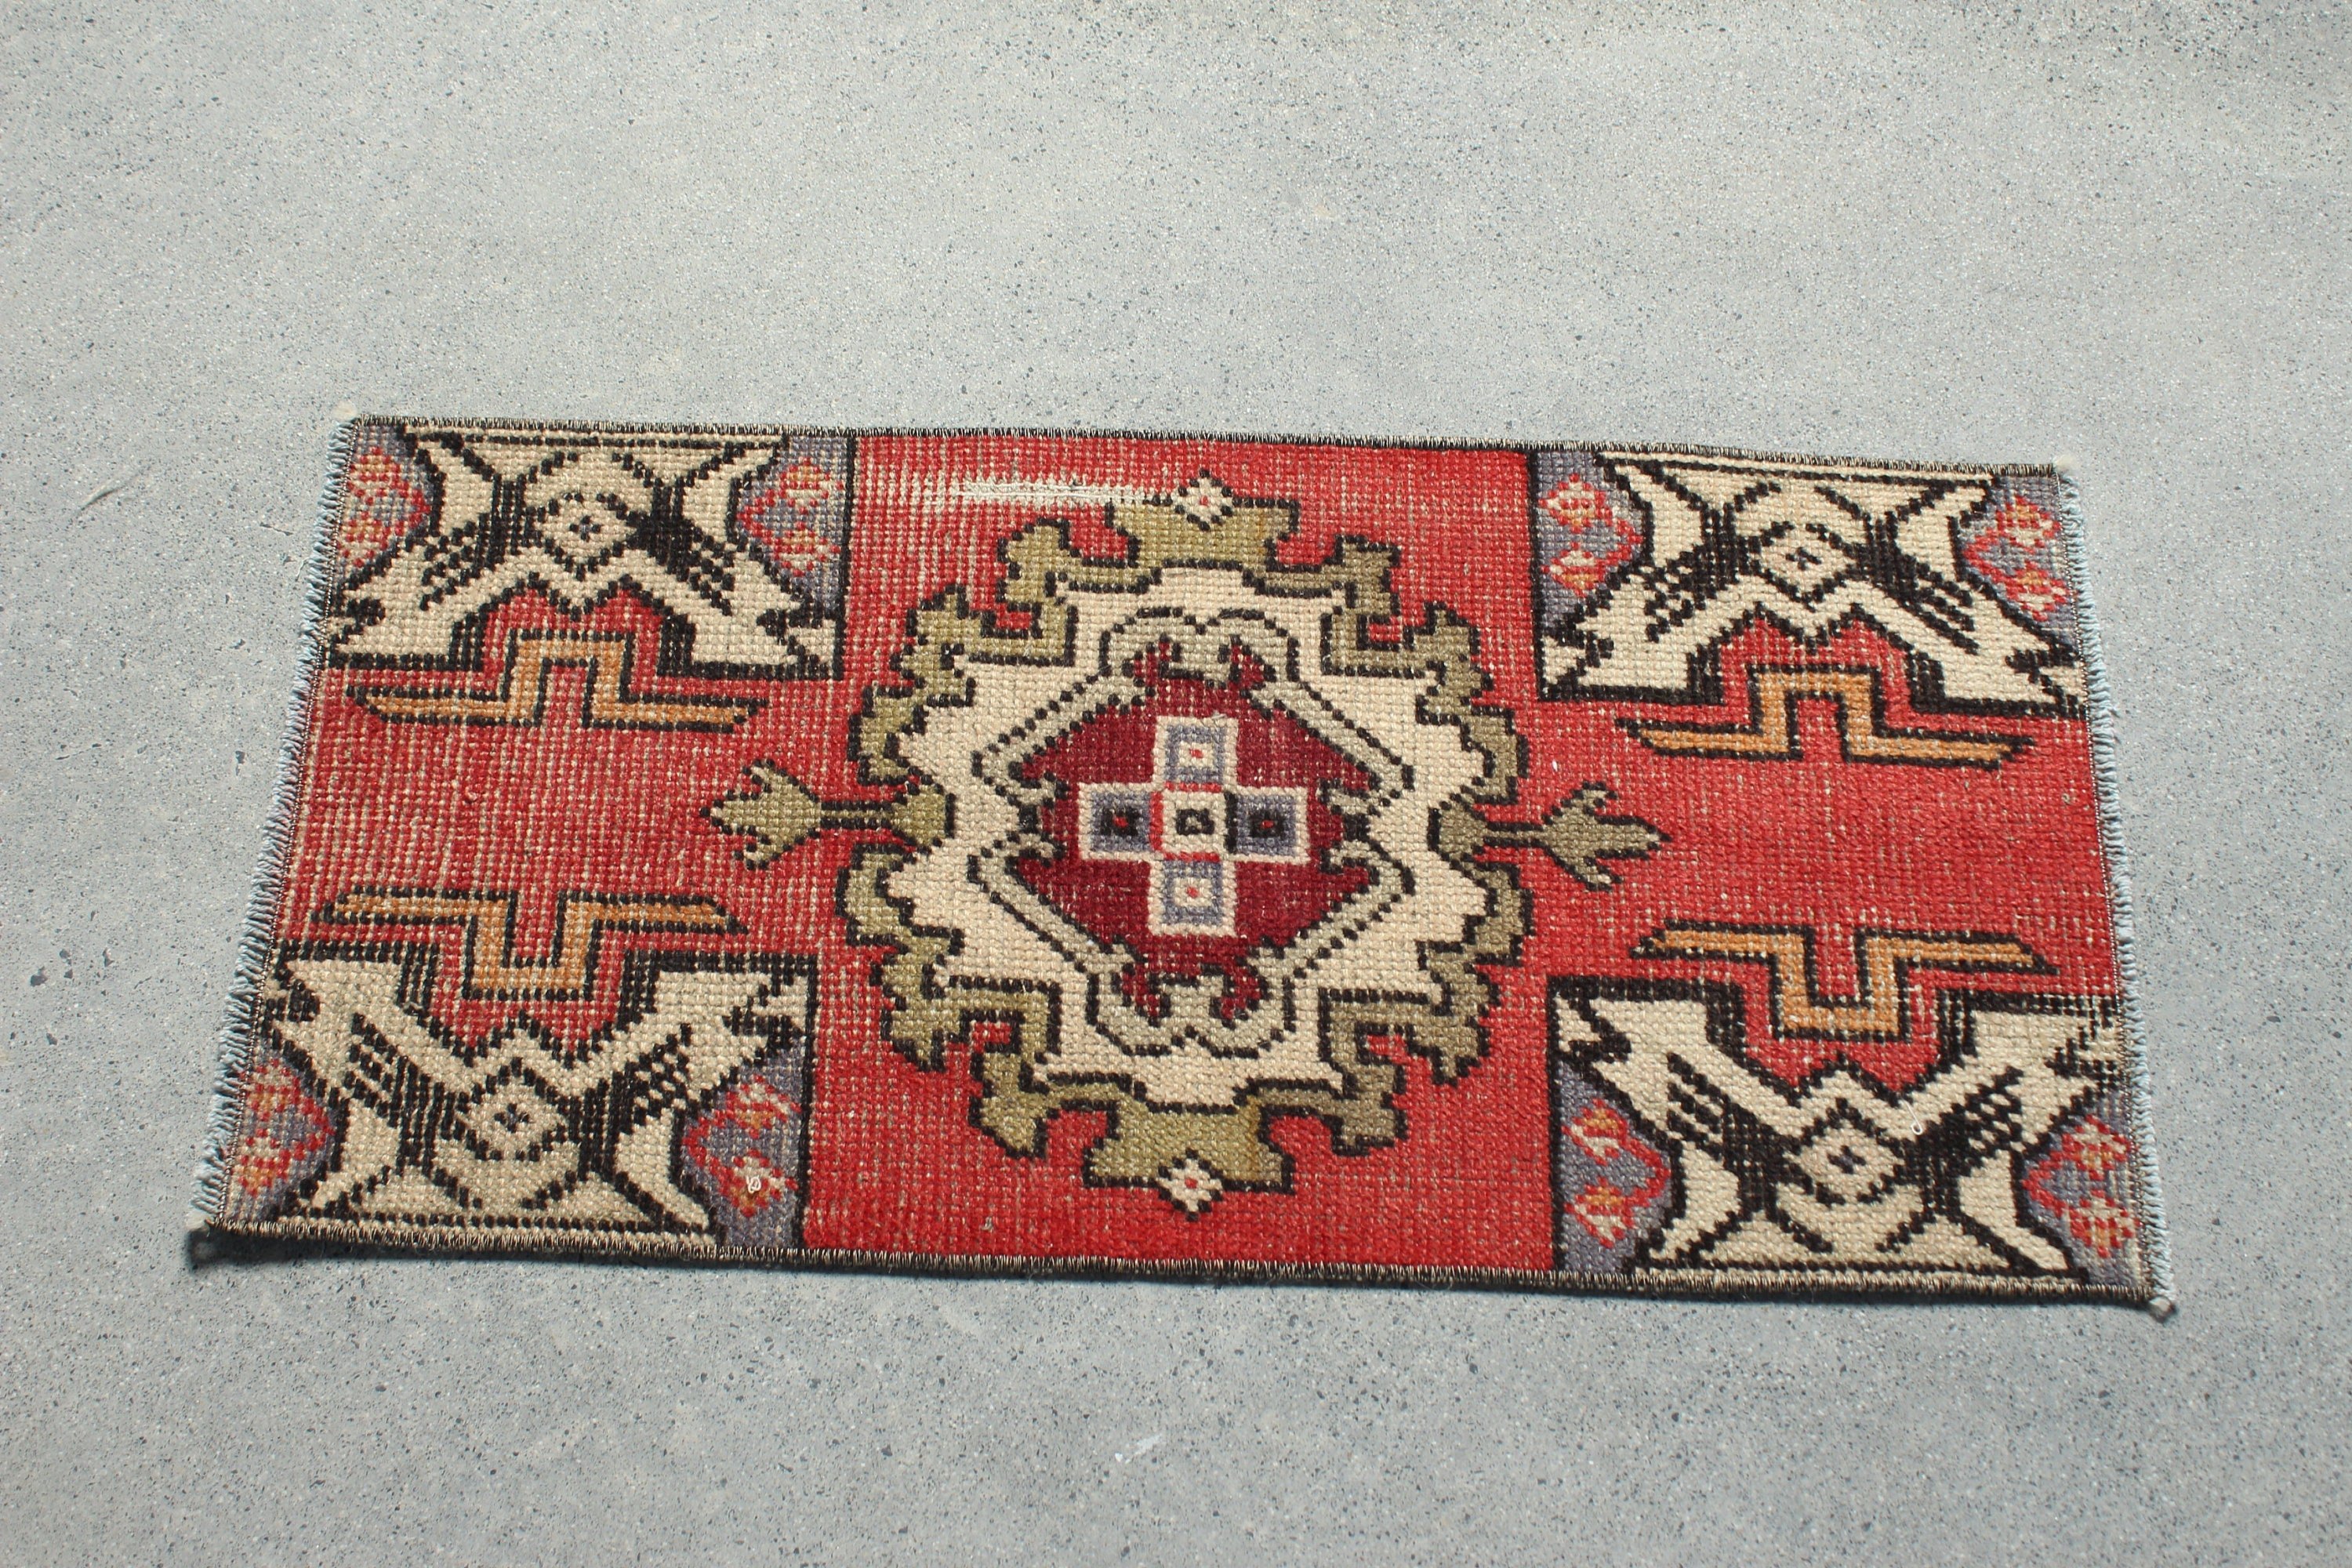 Entry Rug, Floor Rug, Kitchen Rug, Turkish Rugs, Oushak Rug, 1.4x2.8 ft Small Rug, Vintage Rugs, Rugs for Kitchen, Red Home Decor Rug